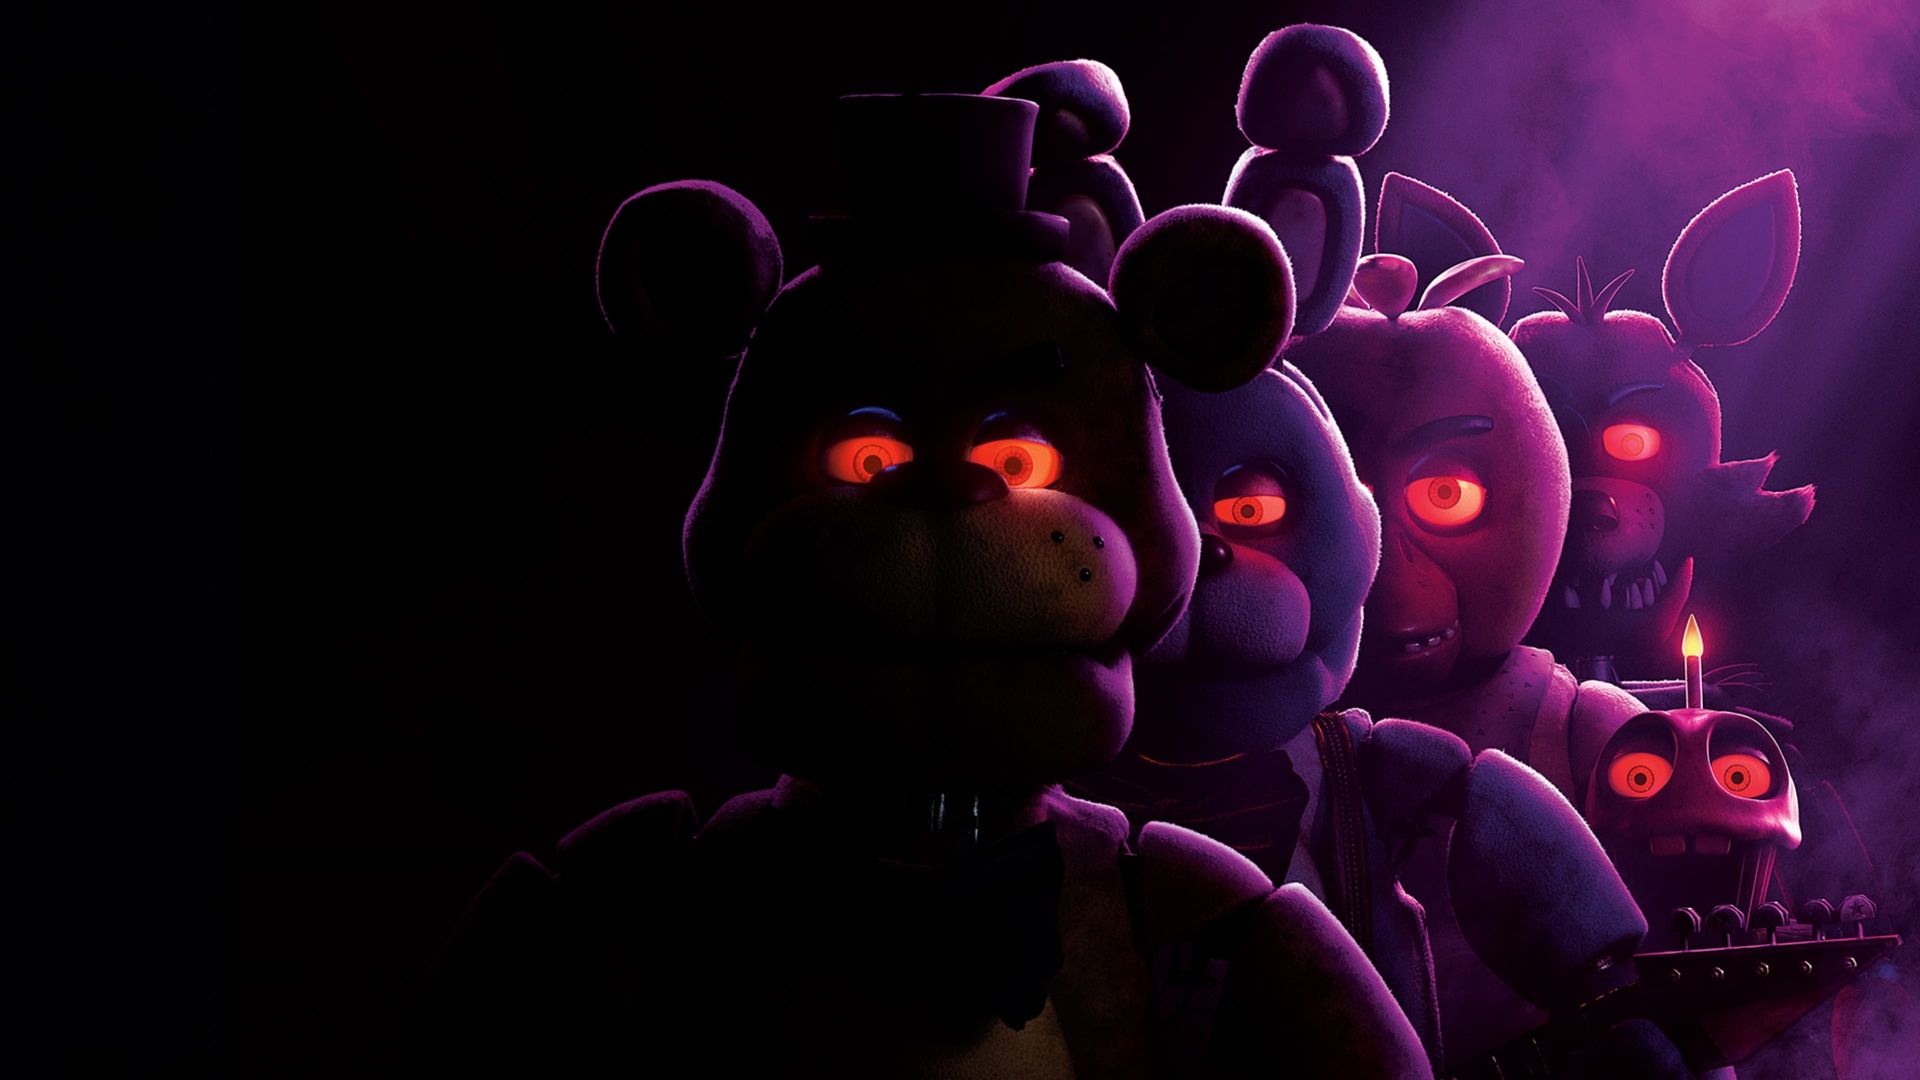 To be beautiful - Five Nights at Freddy's, GH'S ANIMATION in 2023